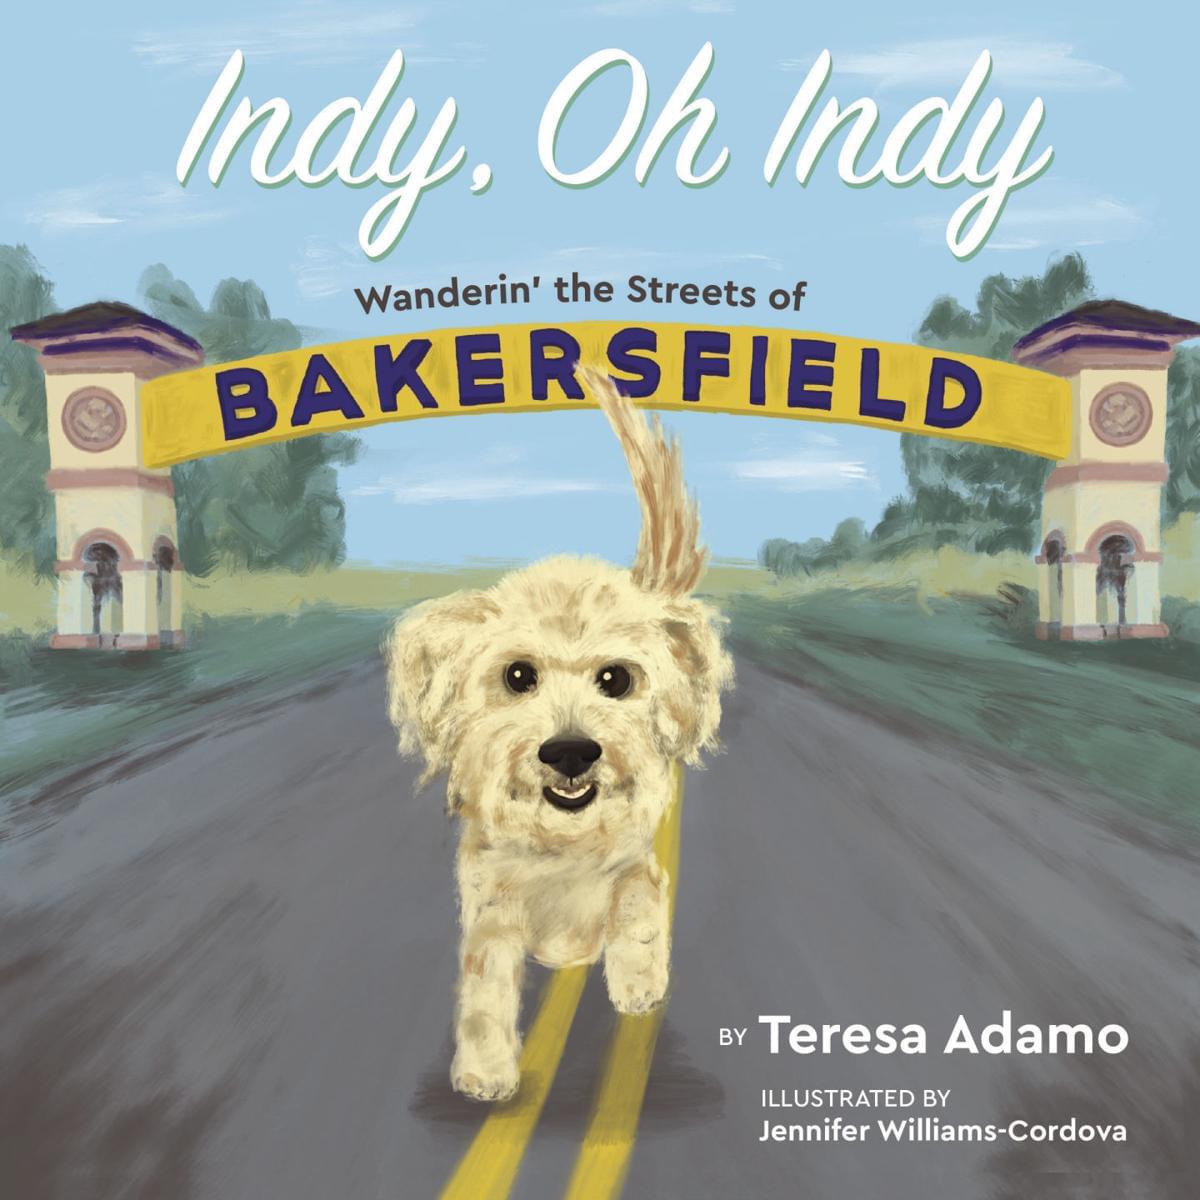 Bakersfield’s Teresa Adamo talks about her book “Indy, Oh Indy”